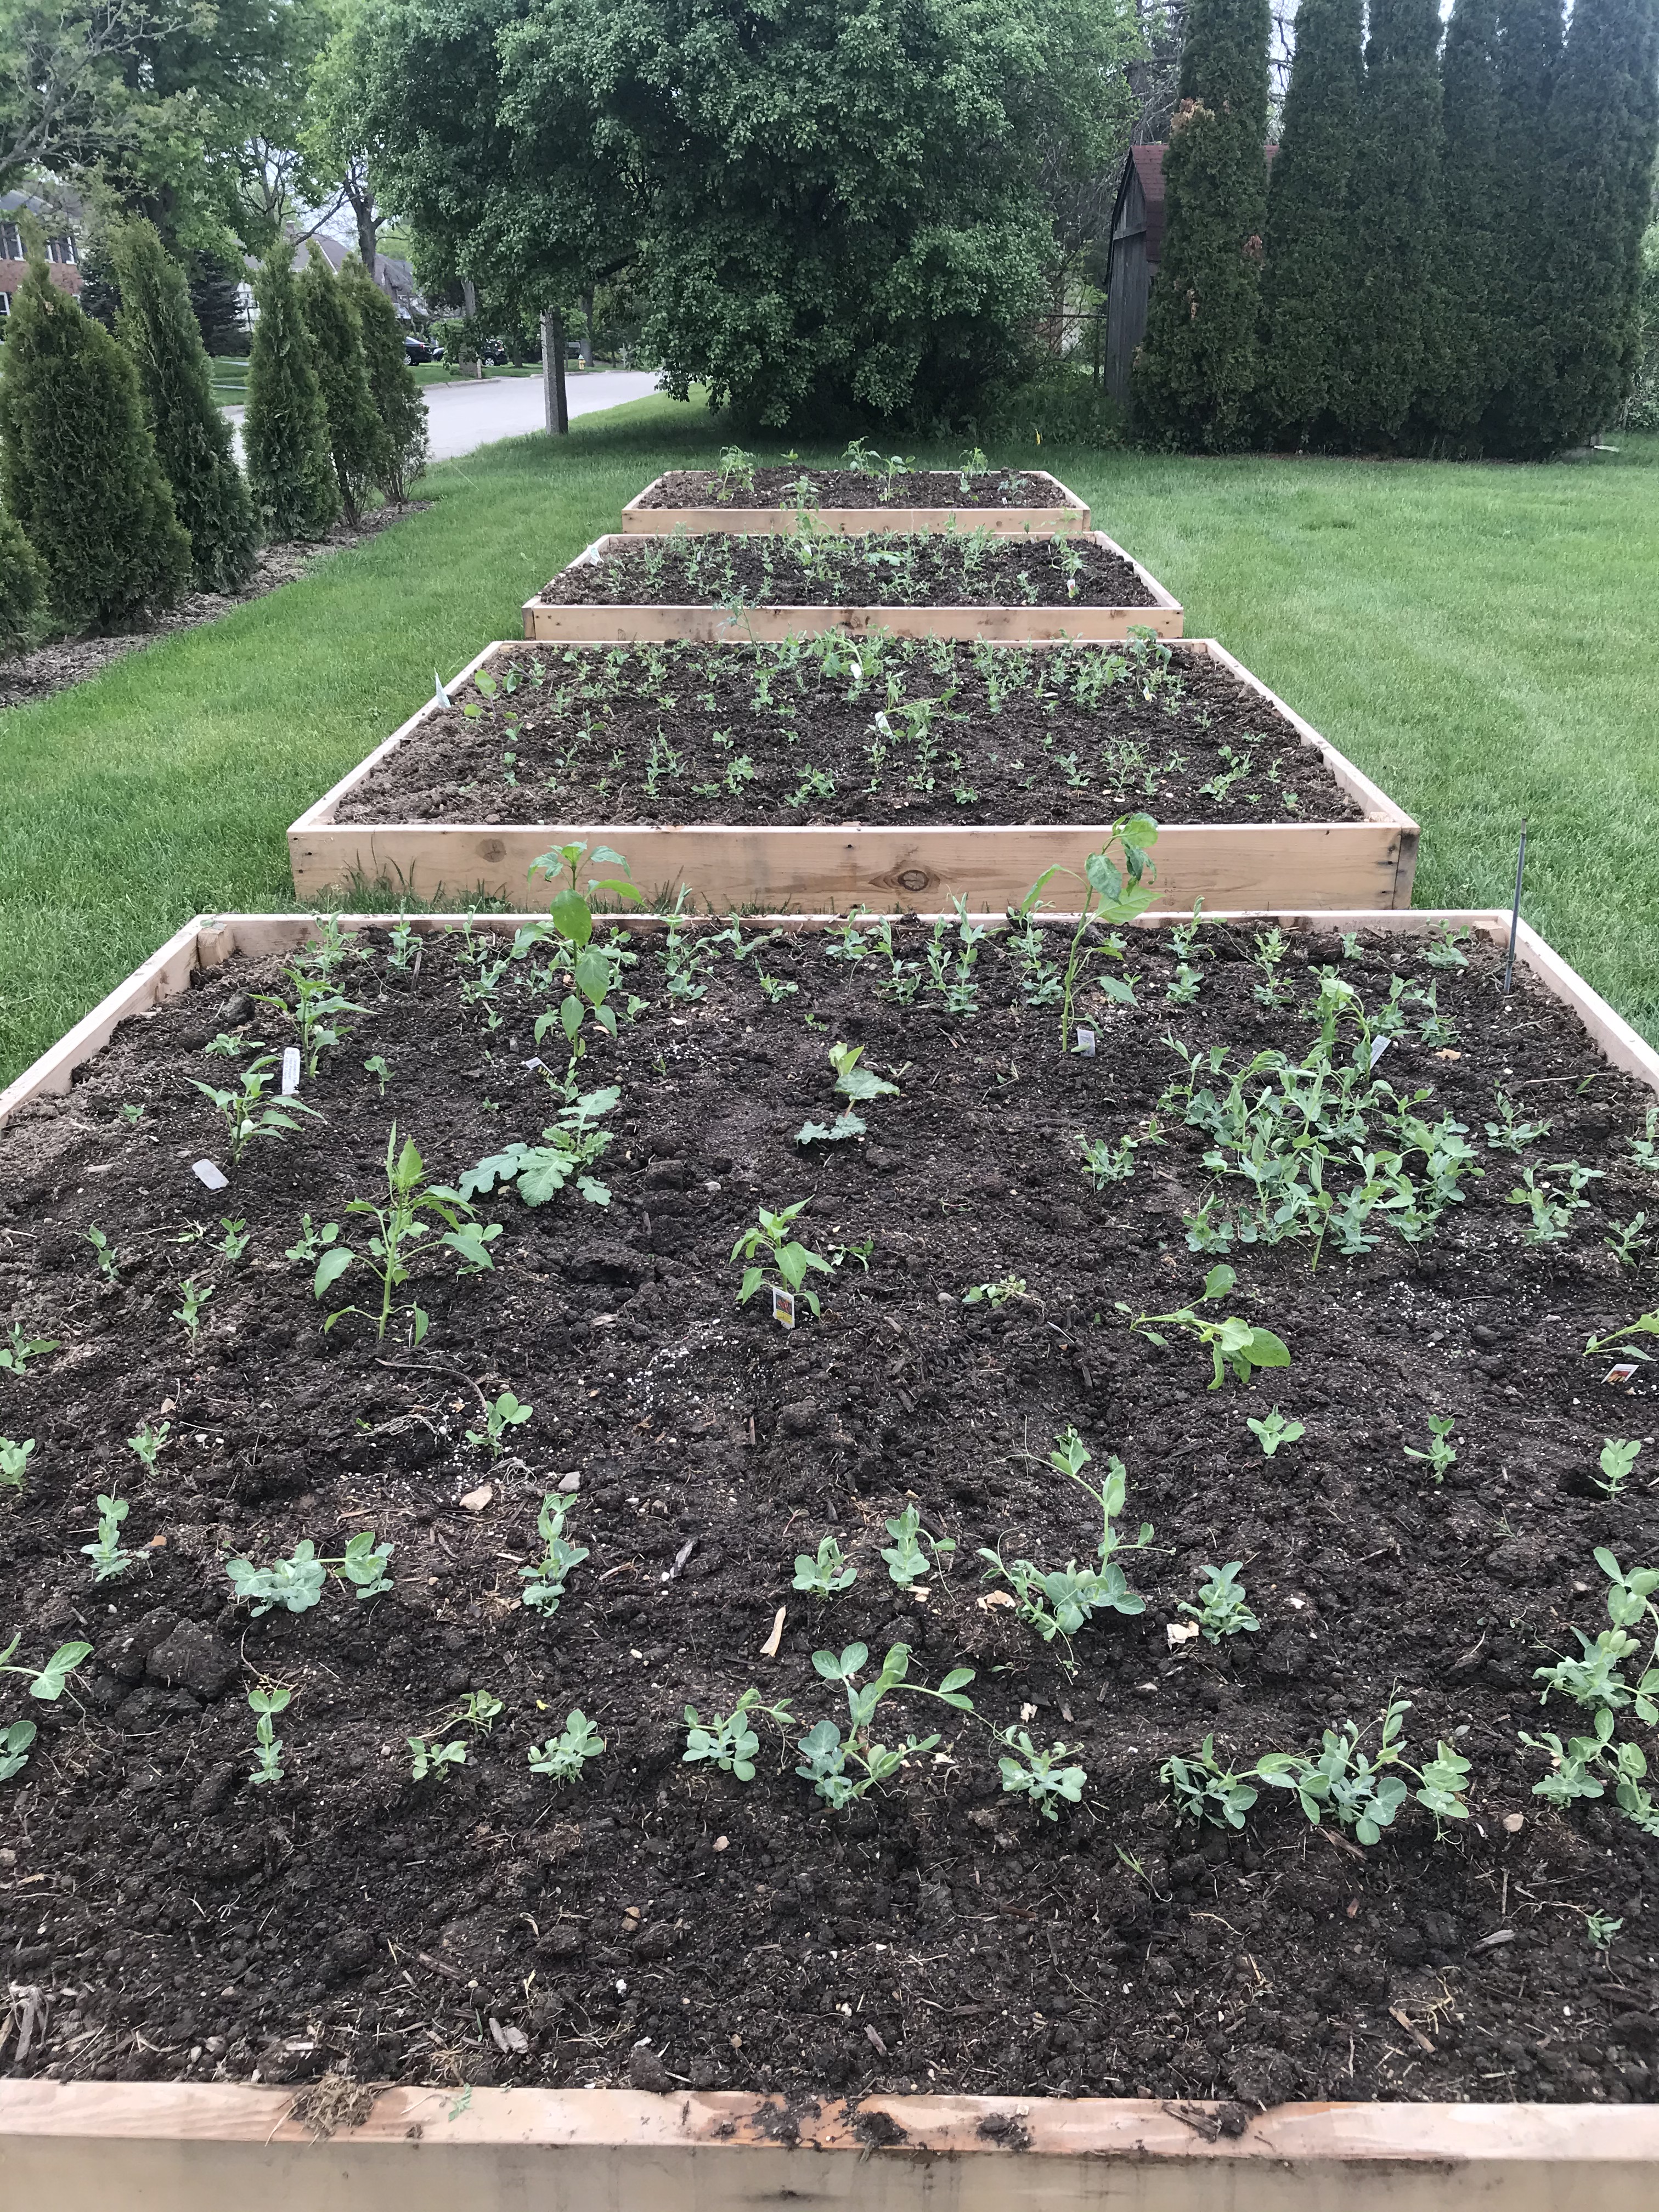 Four raised garden beds with tomatoes, eggplants and peppers from background to foreground. Peas growing in the beds in the foreground.